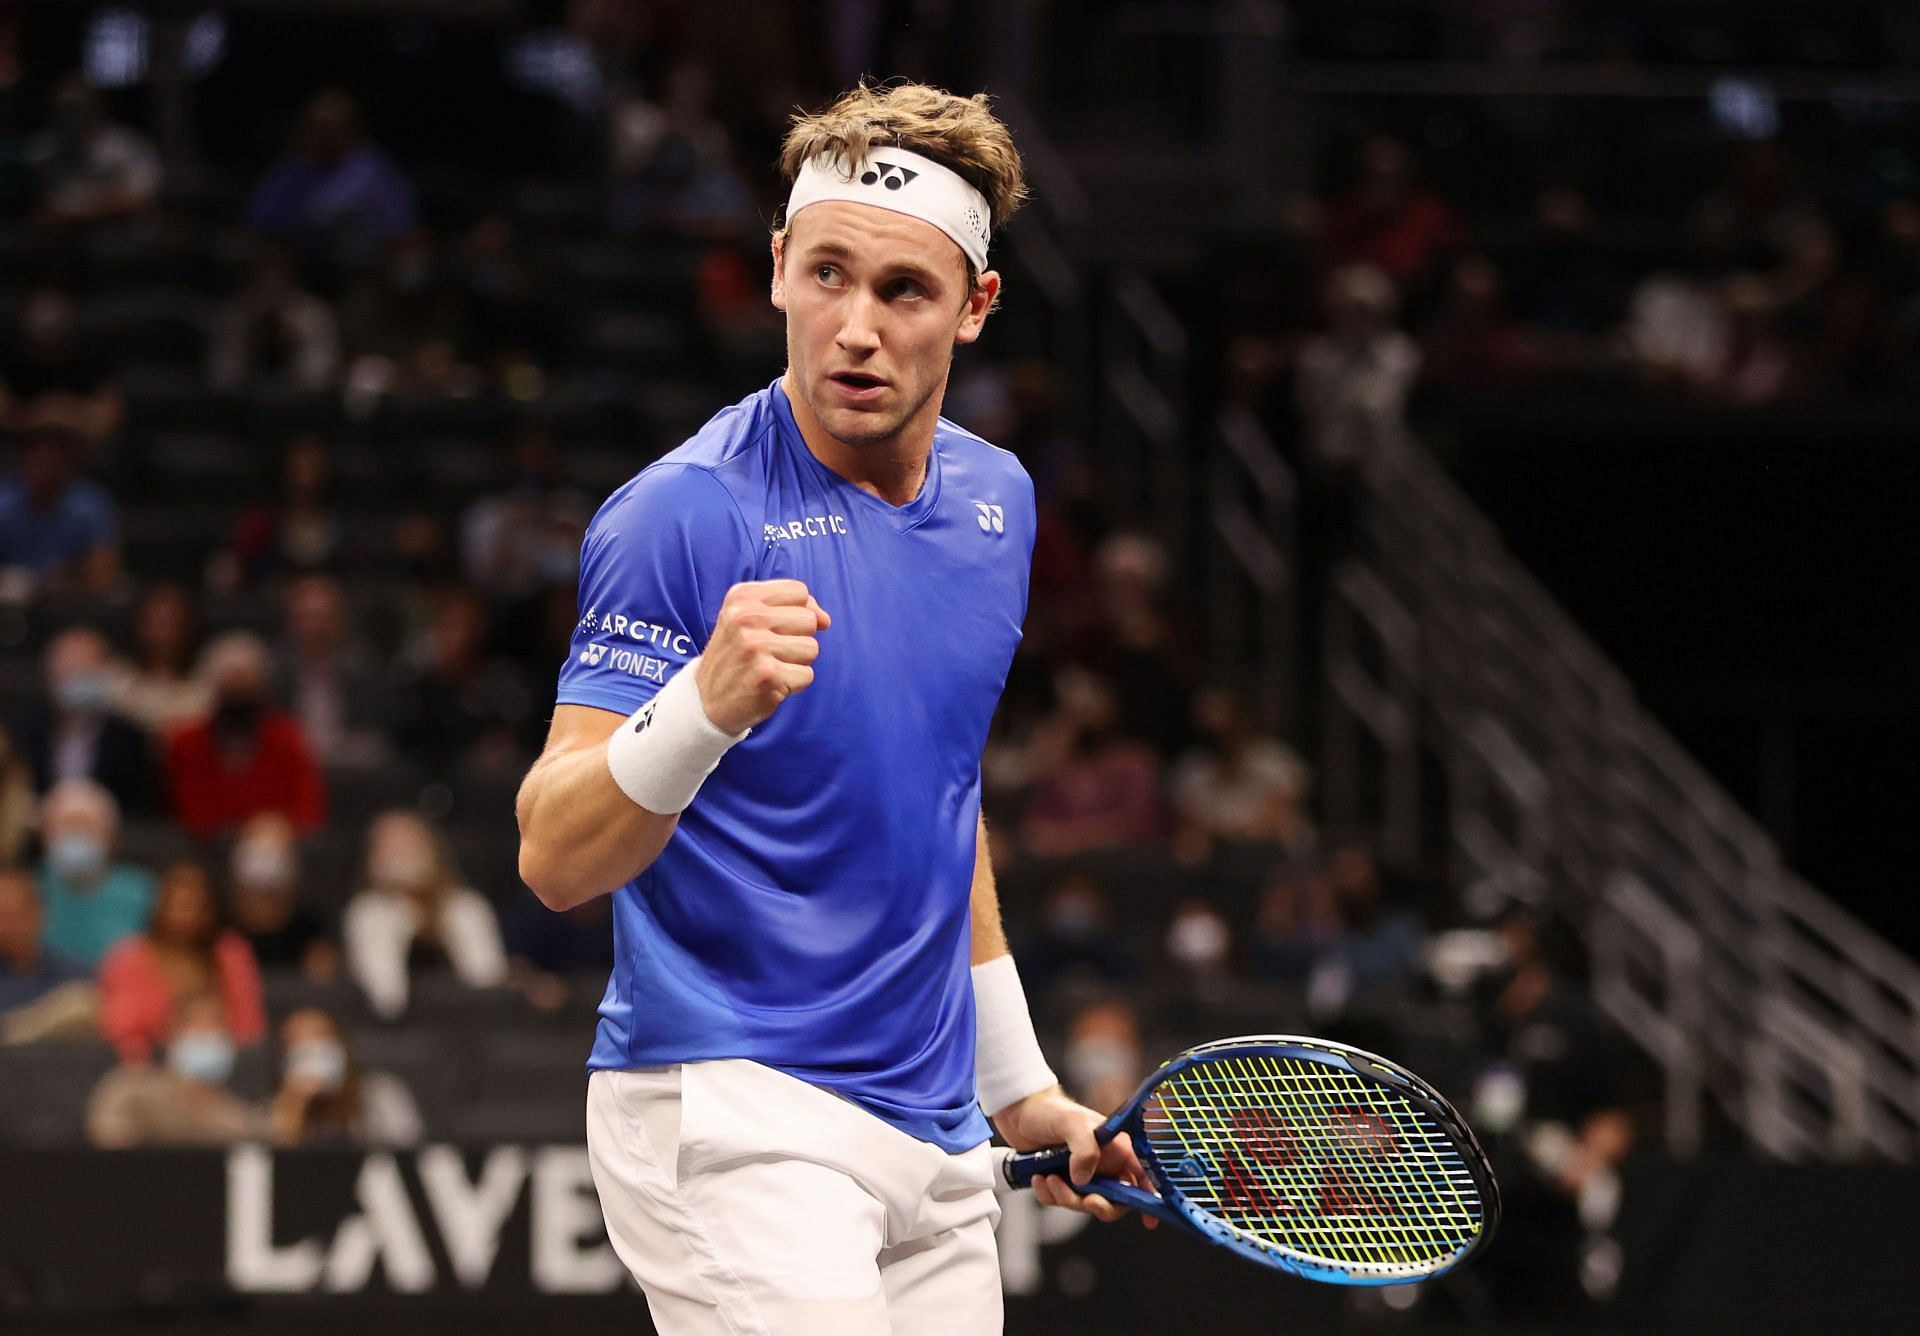 Casper Ruud will be eyeing to secure his place at the ATP Finals/